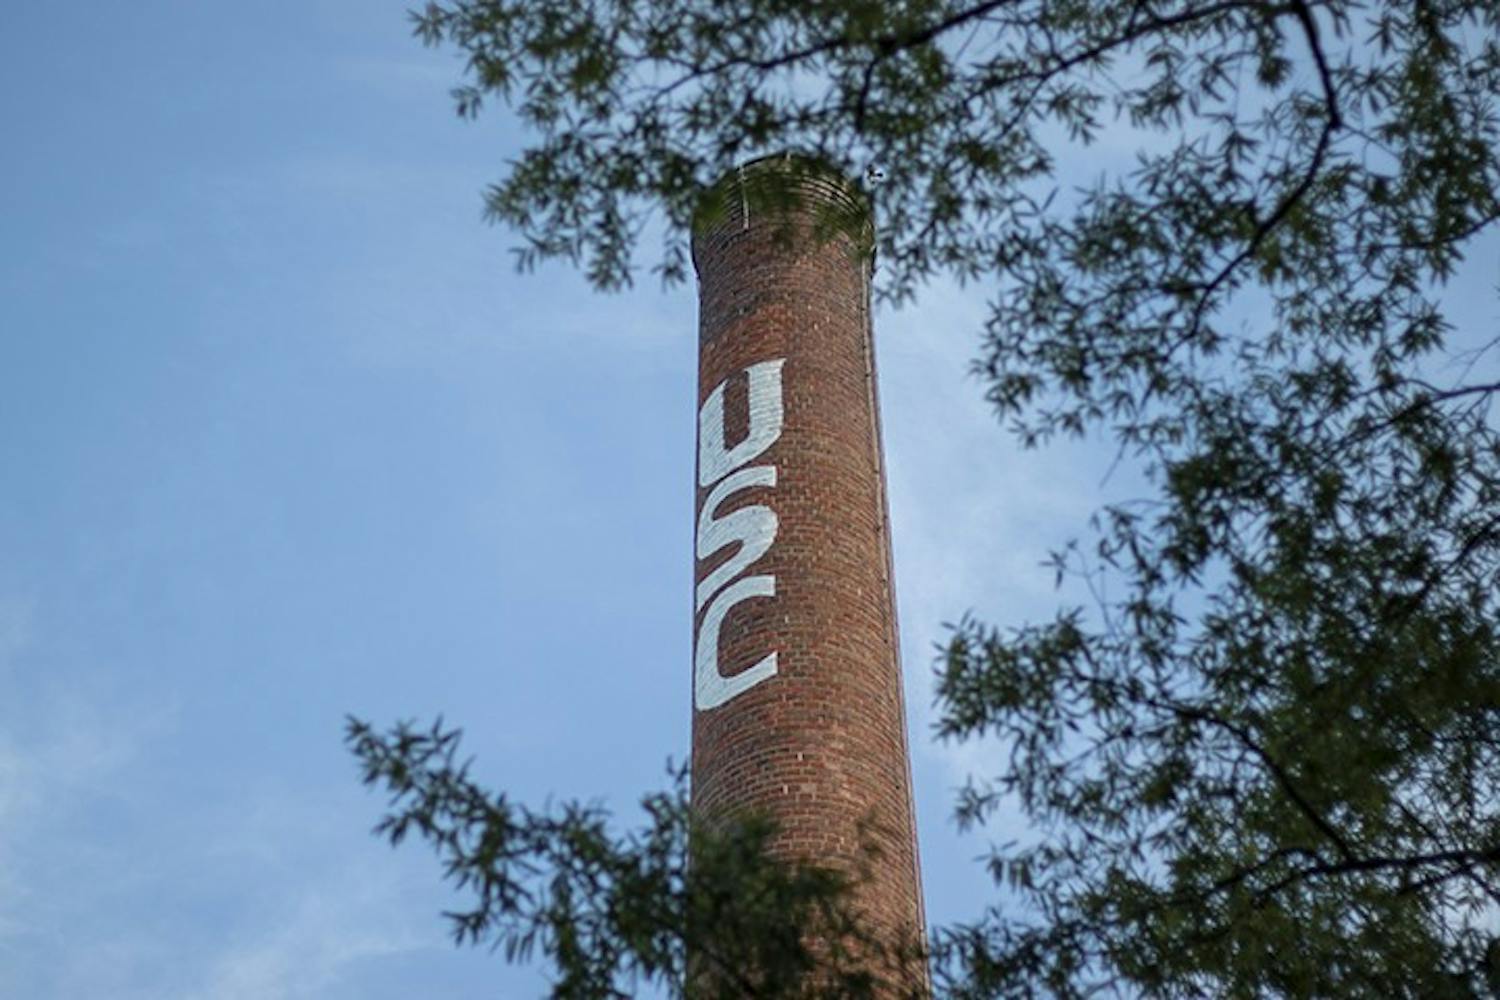 The USC smokestack located next to the Horseshoe is a notable landmark on the university’s campus.